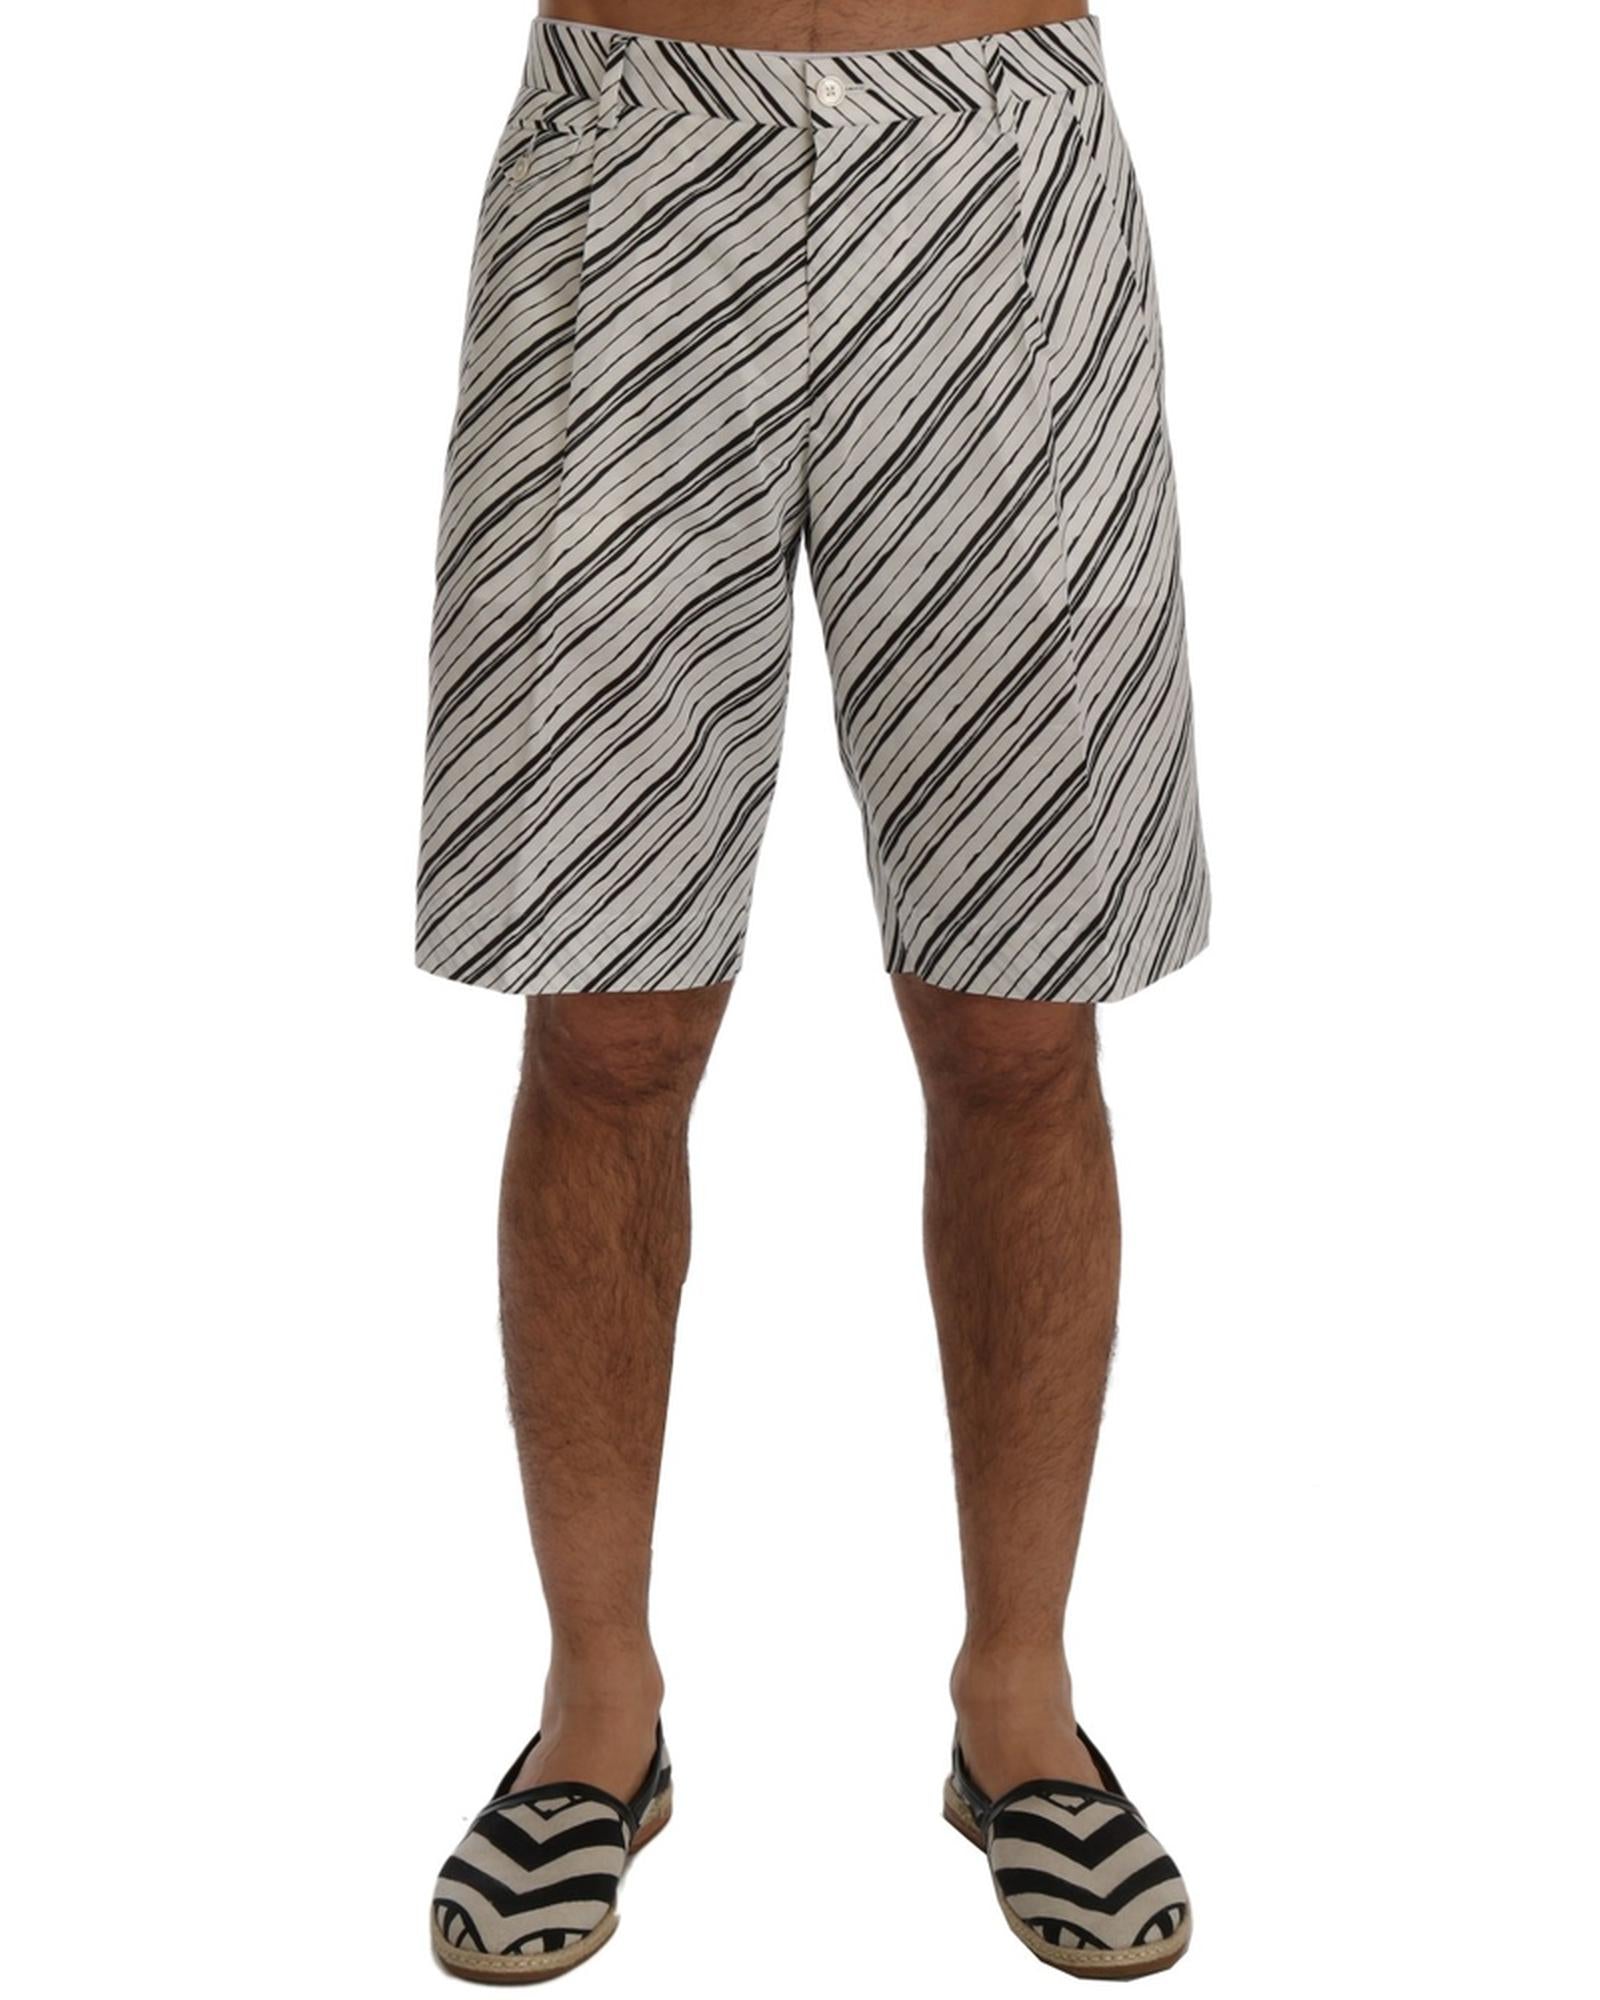 Striped Casual Shorts by Dolce &amp; Gabbana 46 IT Men